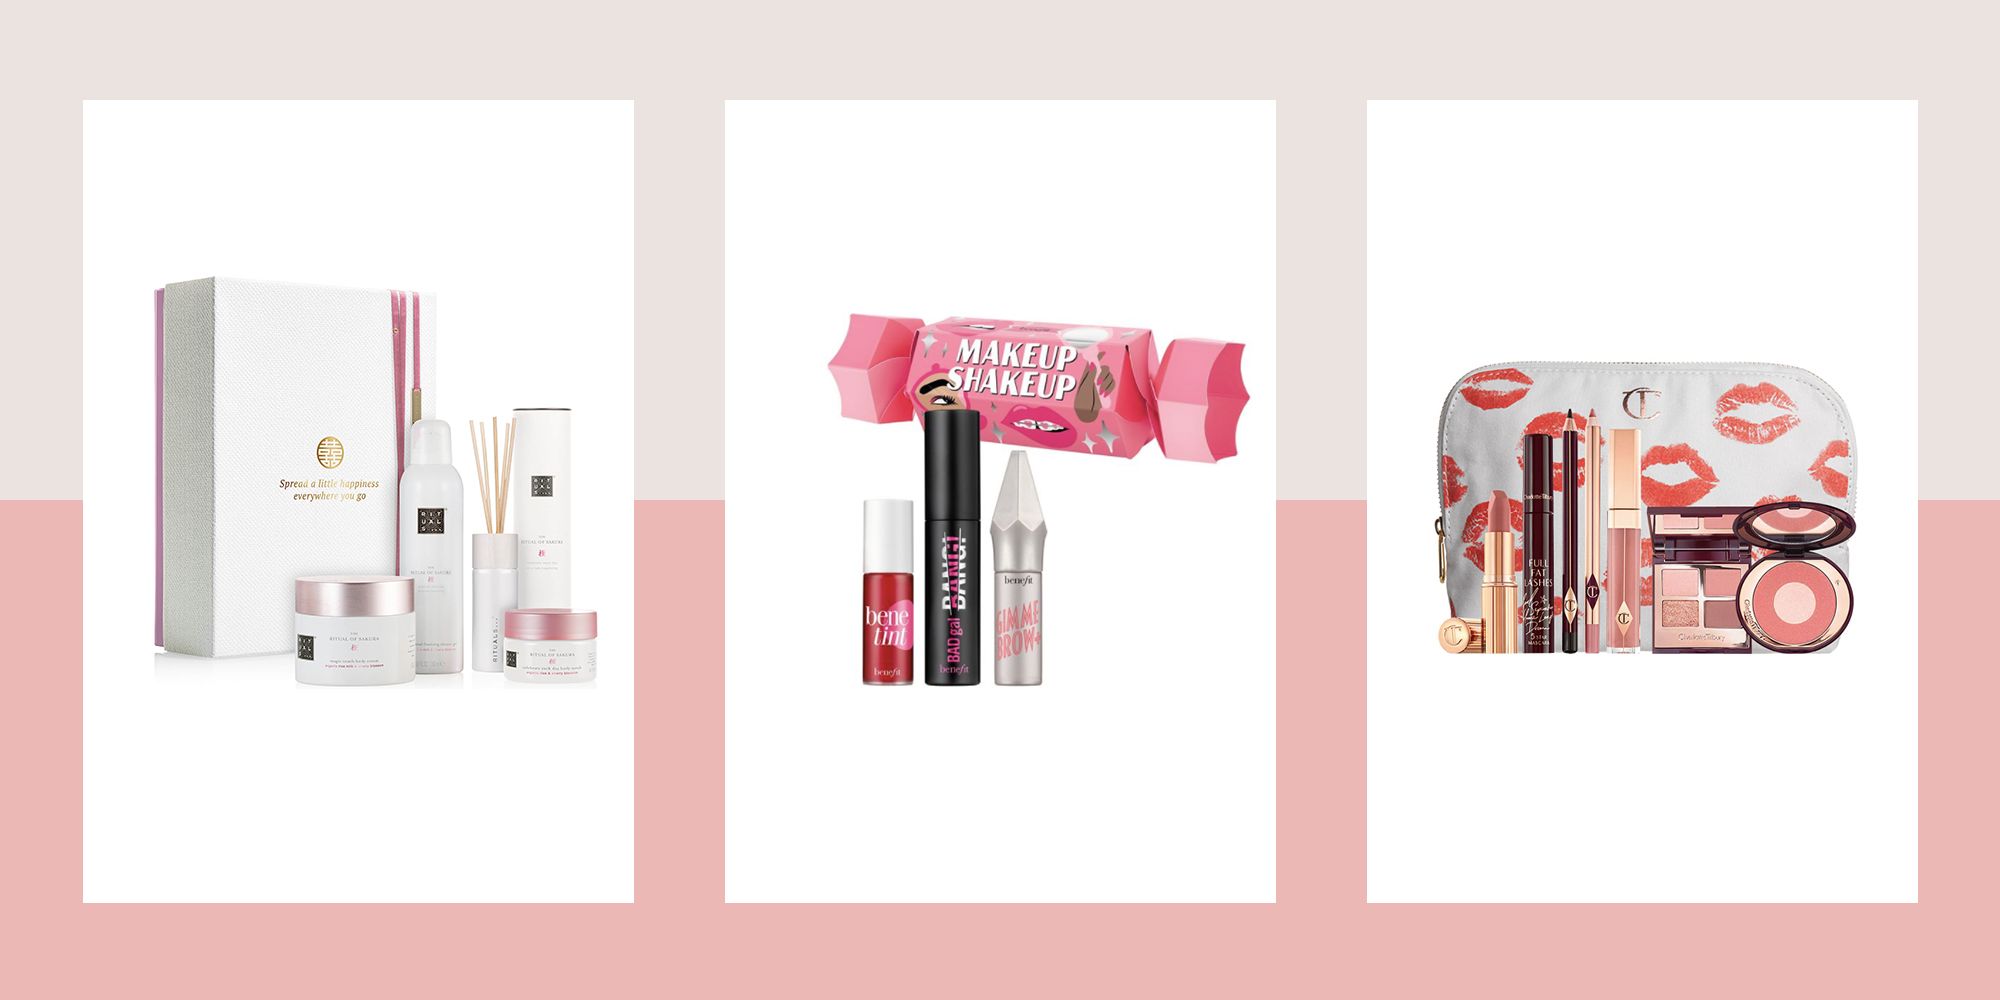 Beauty gifts sets perfect for the 